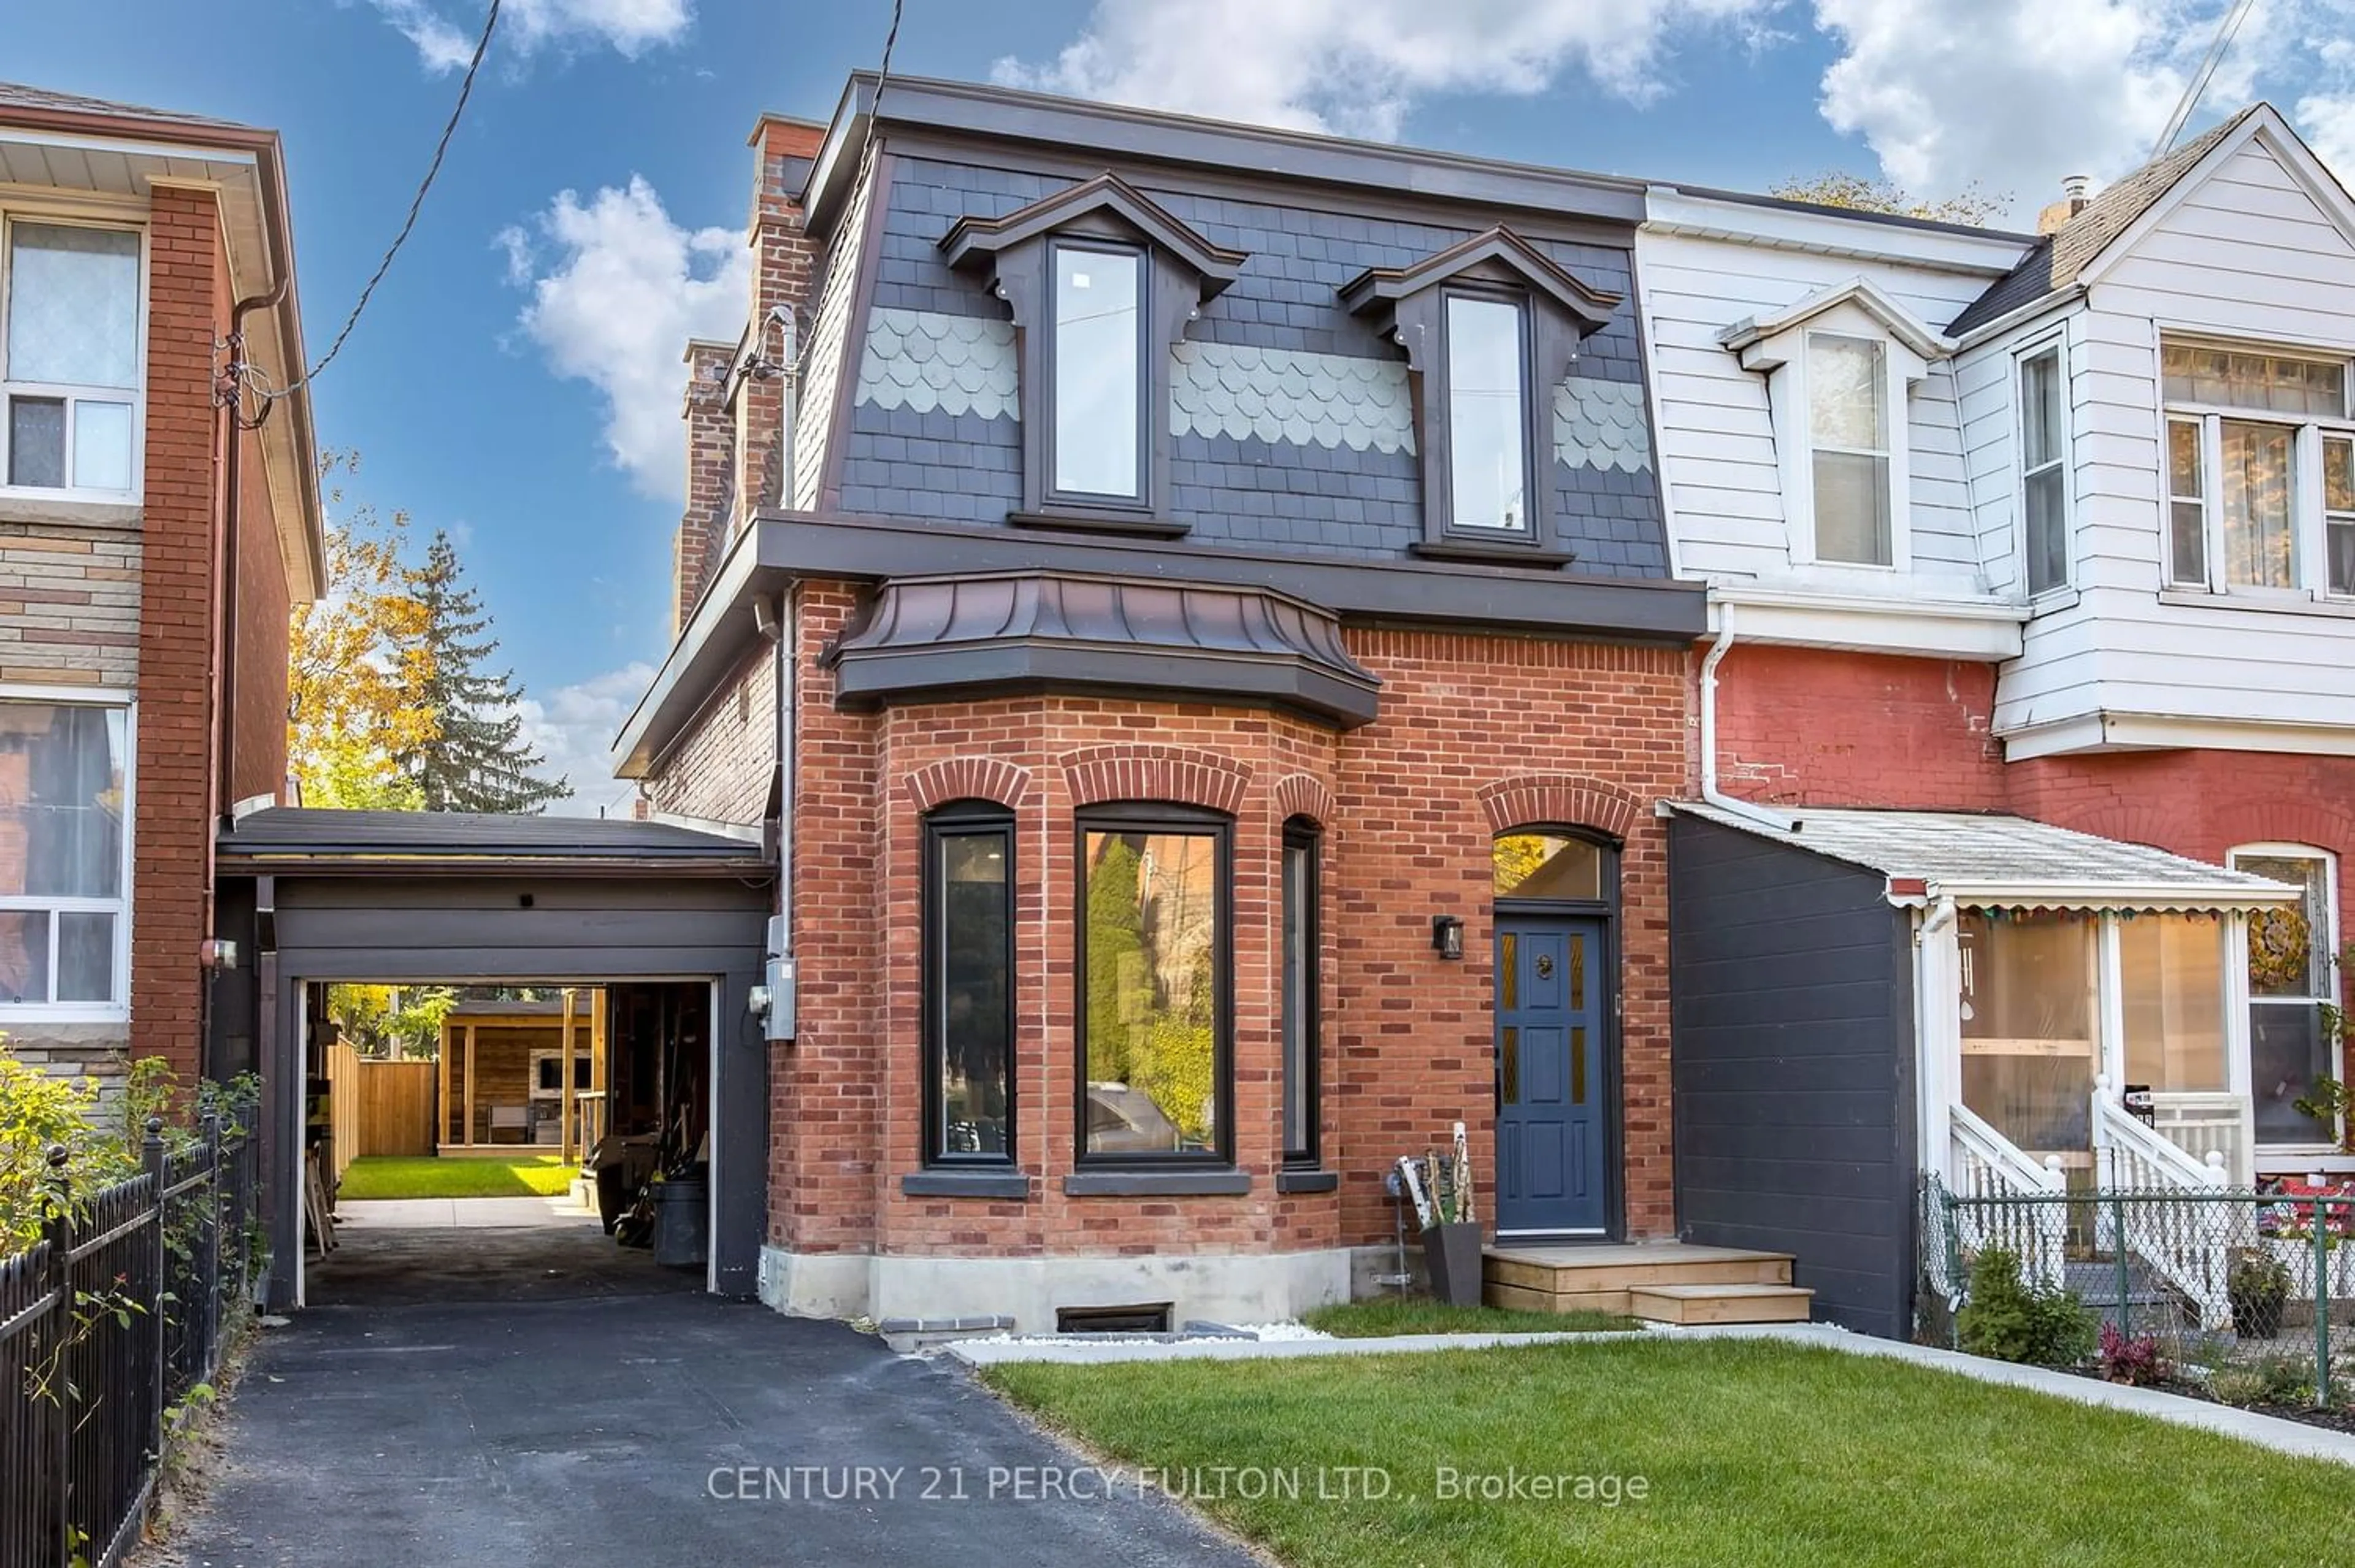 Home with brick exterior material for 50 Macdonell Ave, Toronto Ontario M6R 2A2